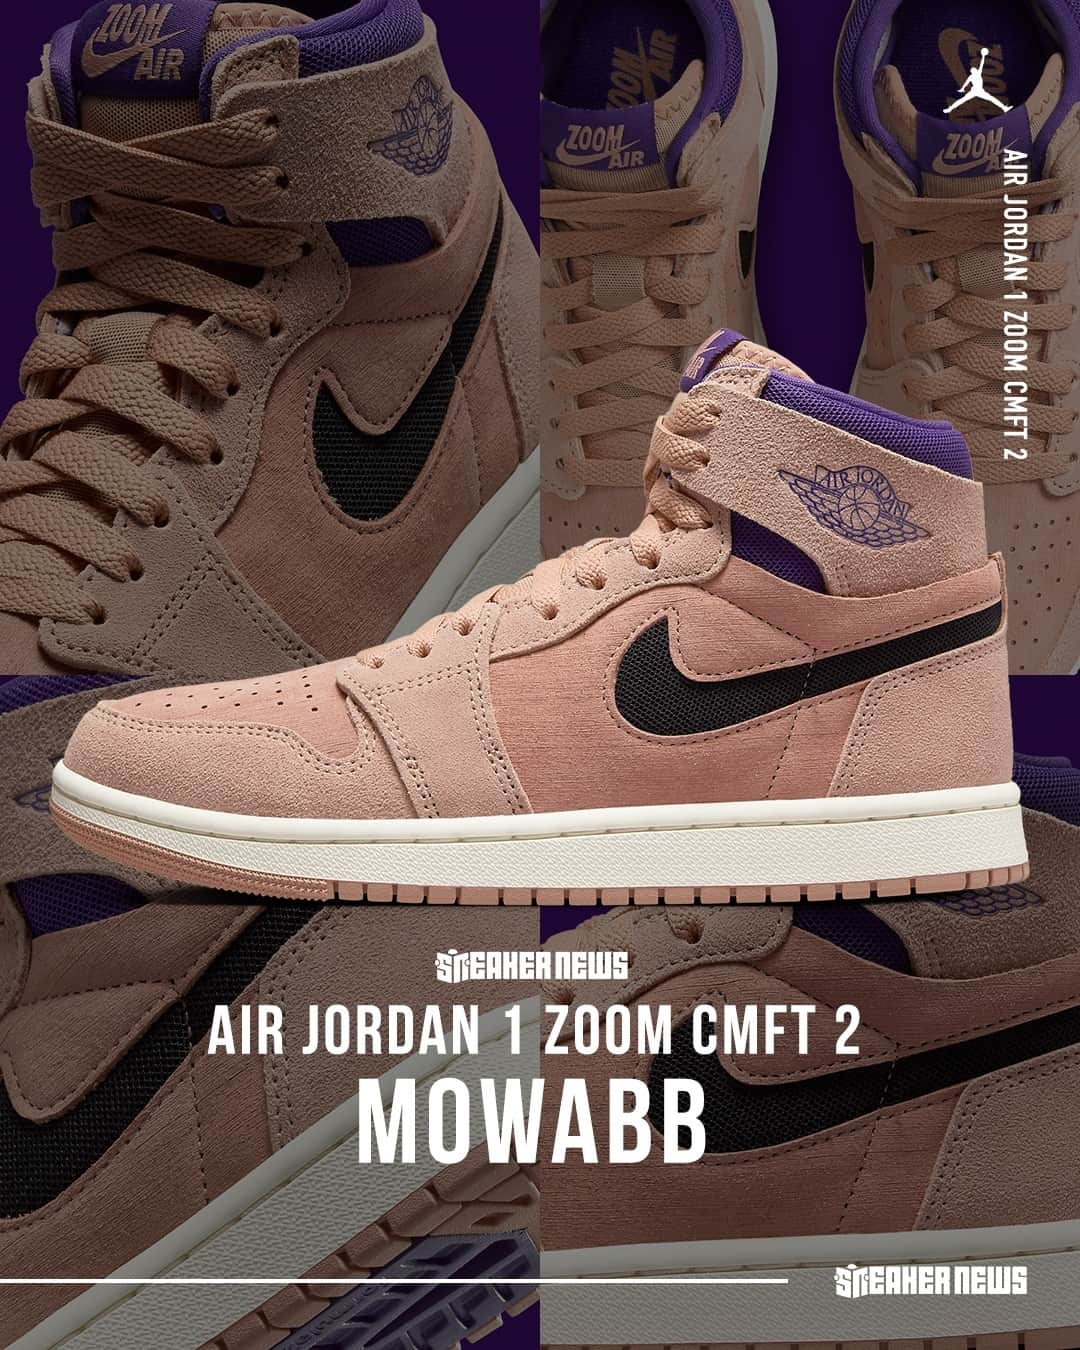 Sneaker Newsのインスタグラム：「Mowabb-style shades appear on the women's Air Jordan 1 Zoom CMFT 2! Needs some orange laces, though...⁠ LINK IN BIO for a closer look!」